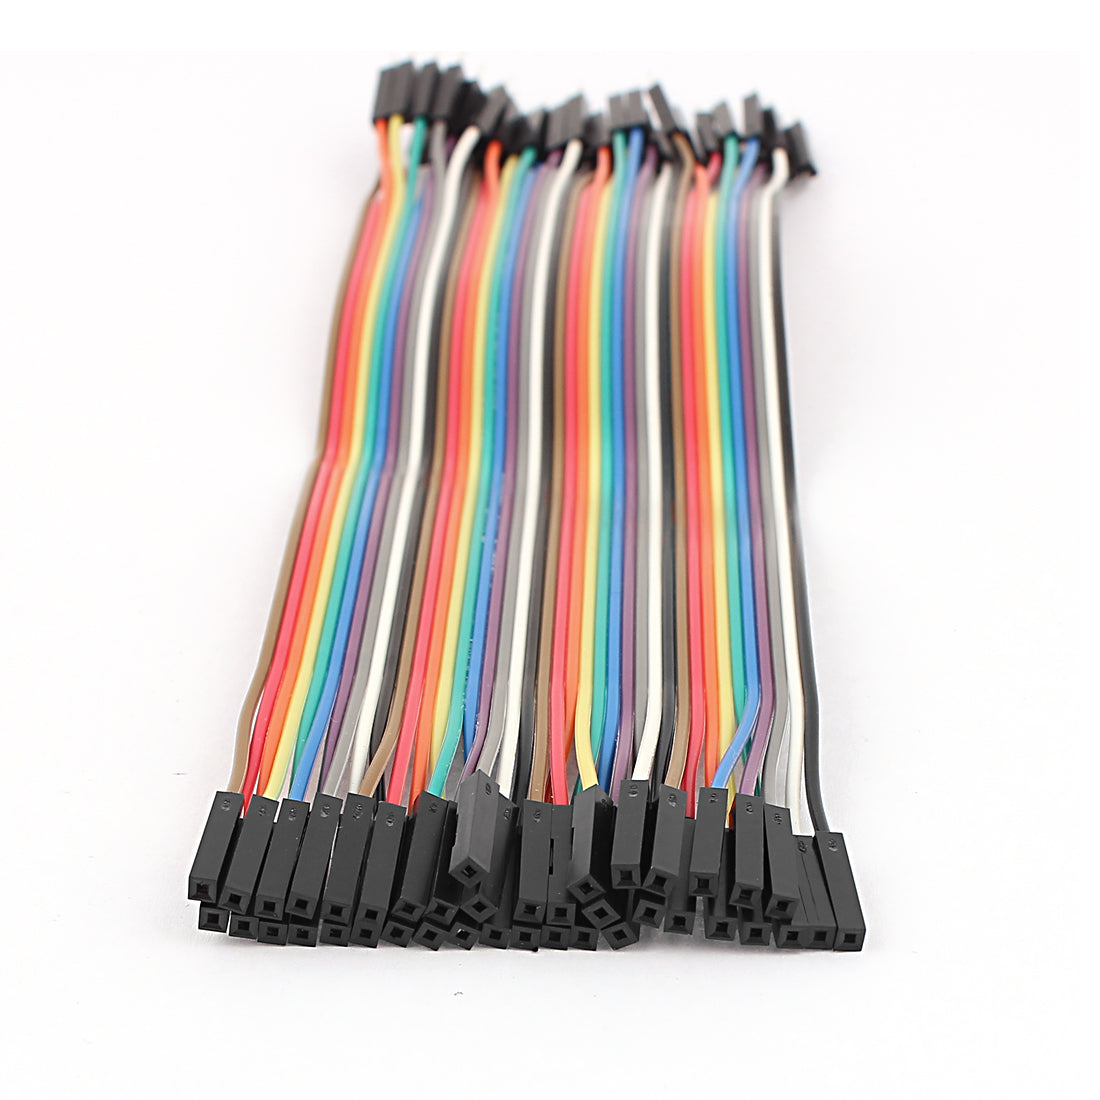 uxcell Uxcell 20cm 40-pin Male to Female Breadboard Jumper Wires Ribbon Flat Cable